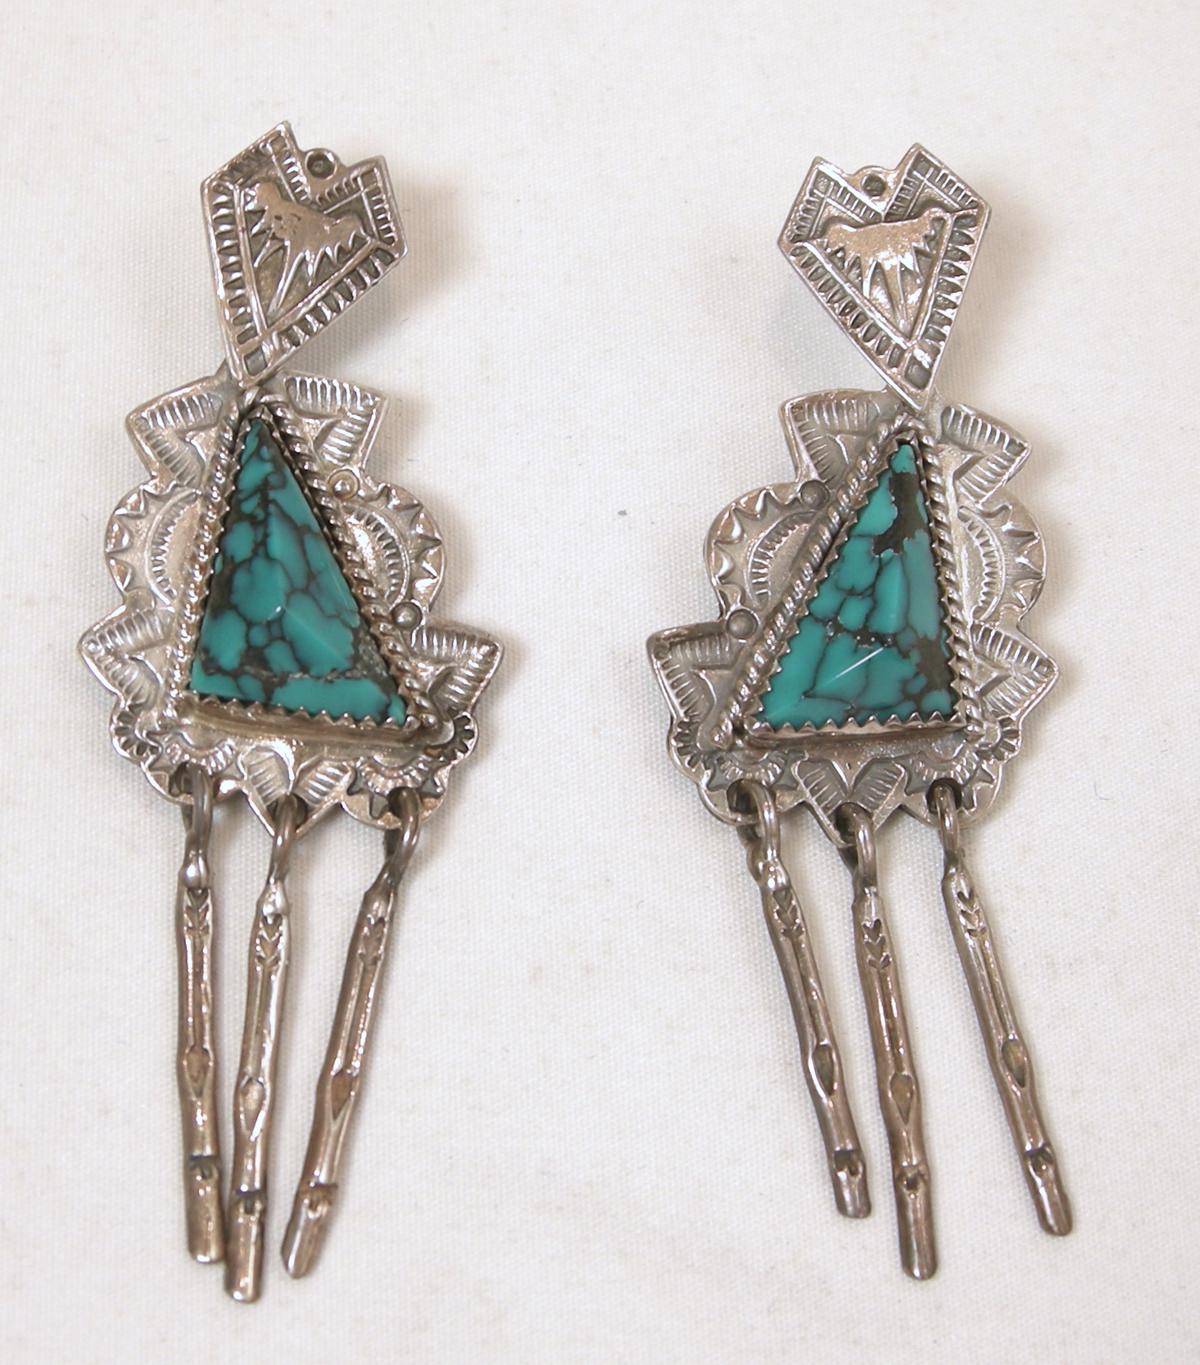 This vintage Native American signed JR Silversmiths earrings have triangular turquoise stones surrounding by a sterling setting.  Three rows of sterling hang down.  These pierced earrings measure 2-5/8” x 1” and are signed “JR Silversmiths”.  They